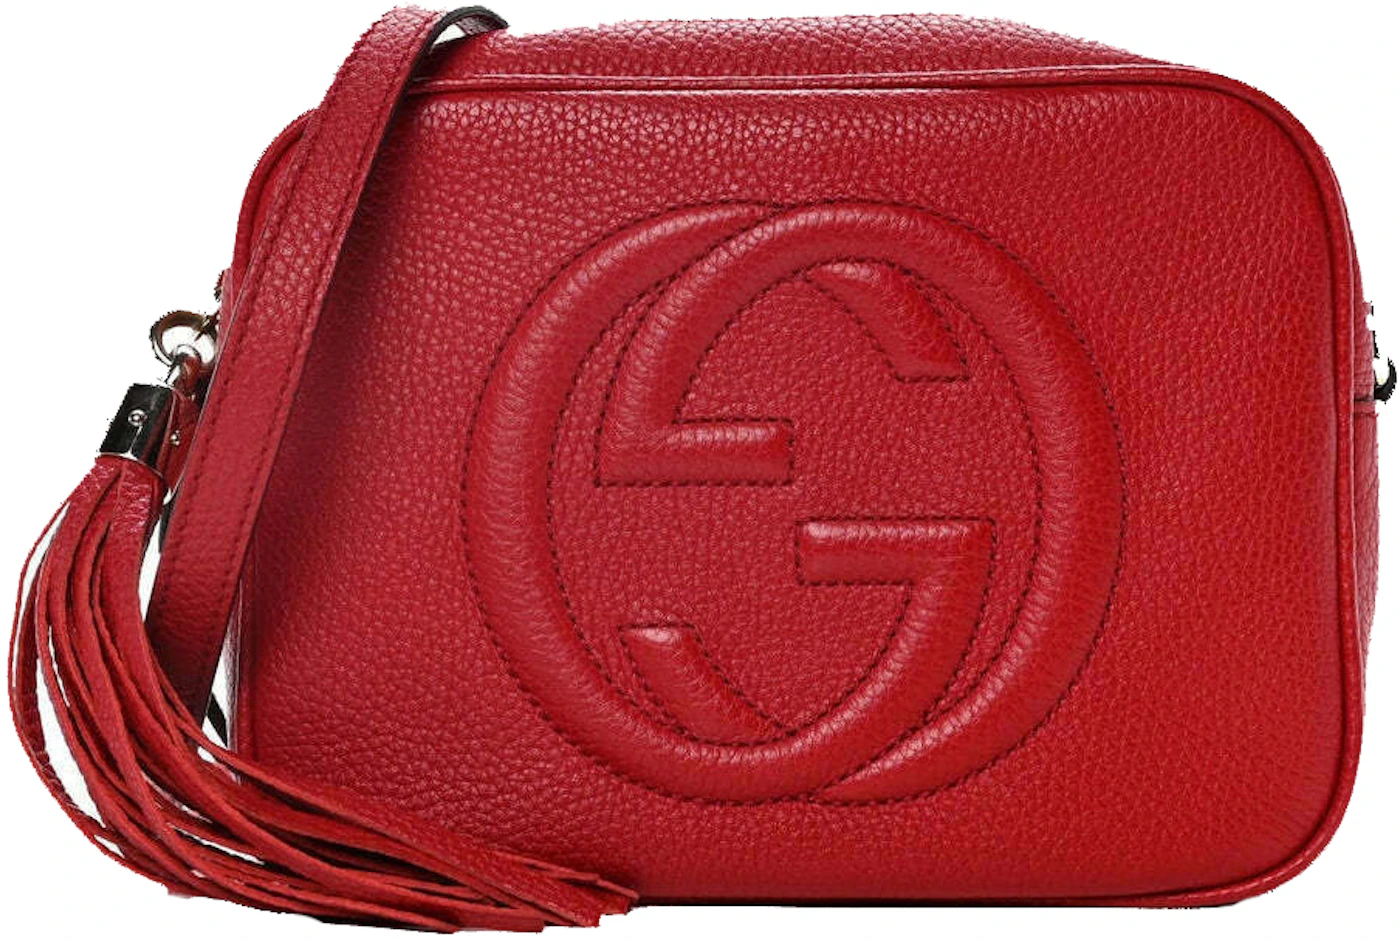 Gucci Soho Bag in Leather with Gold-tone US